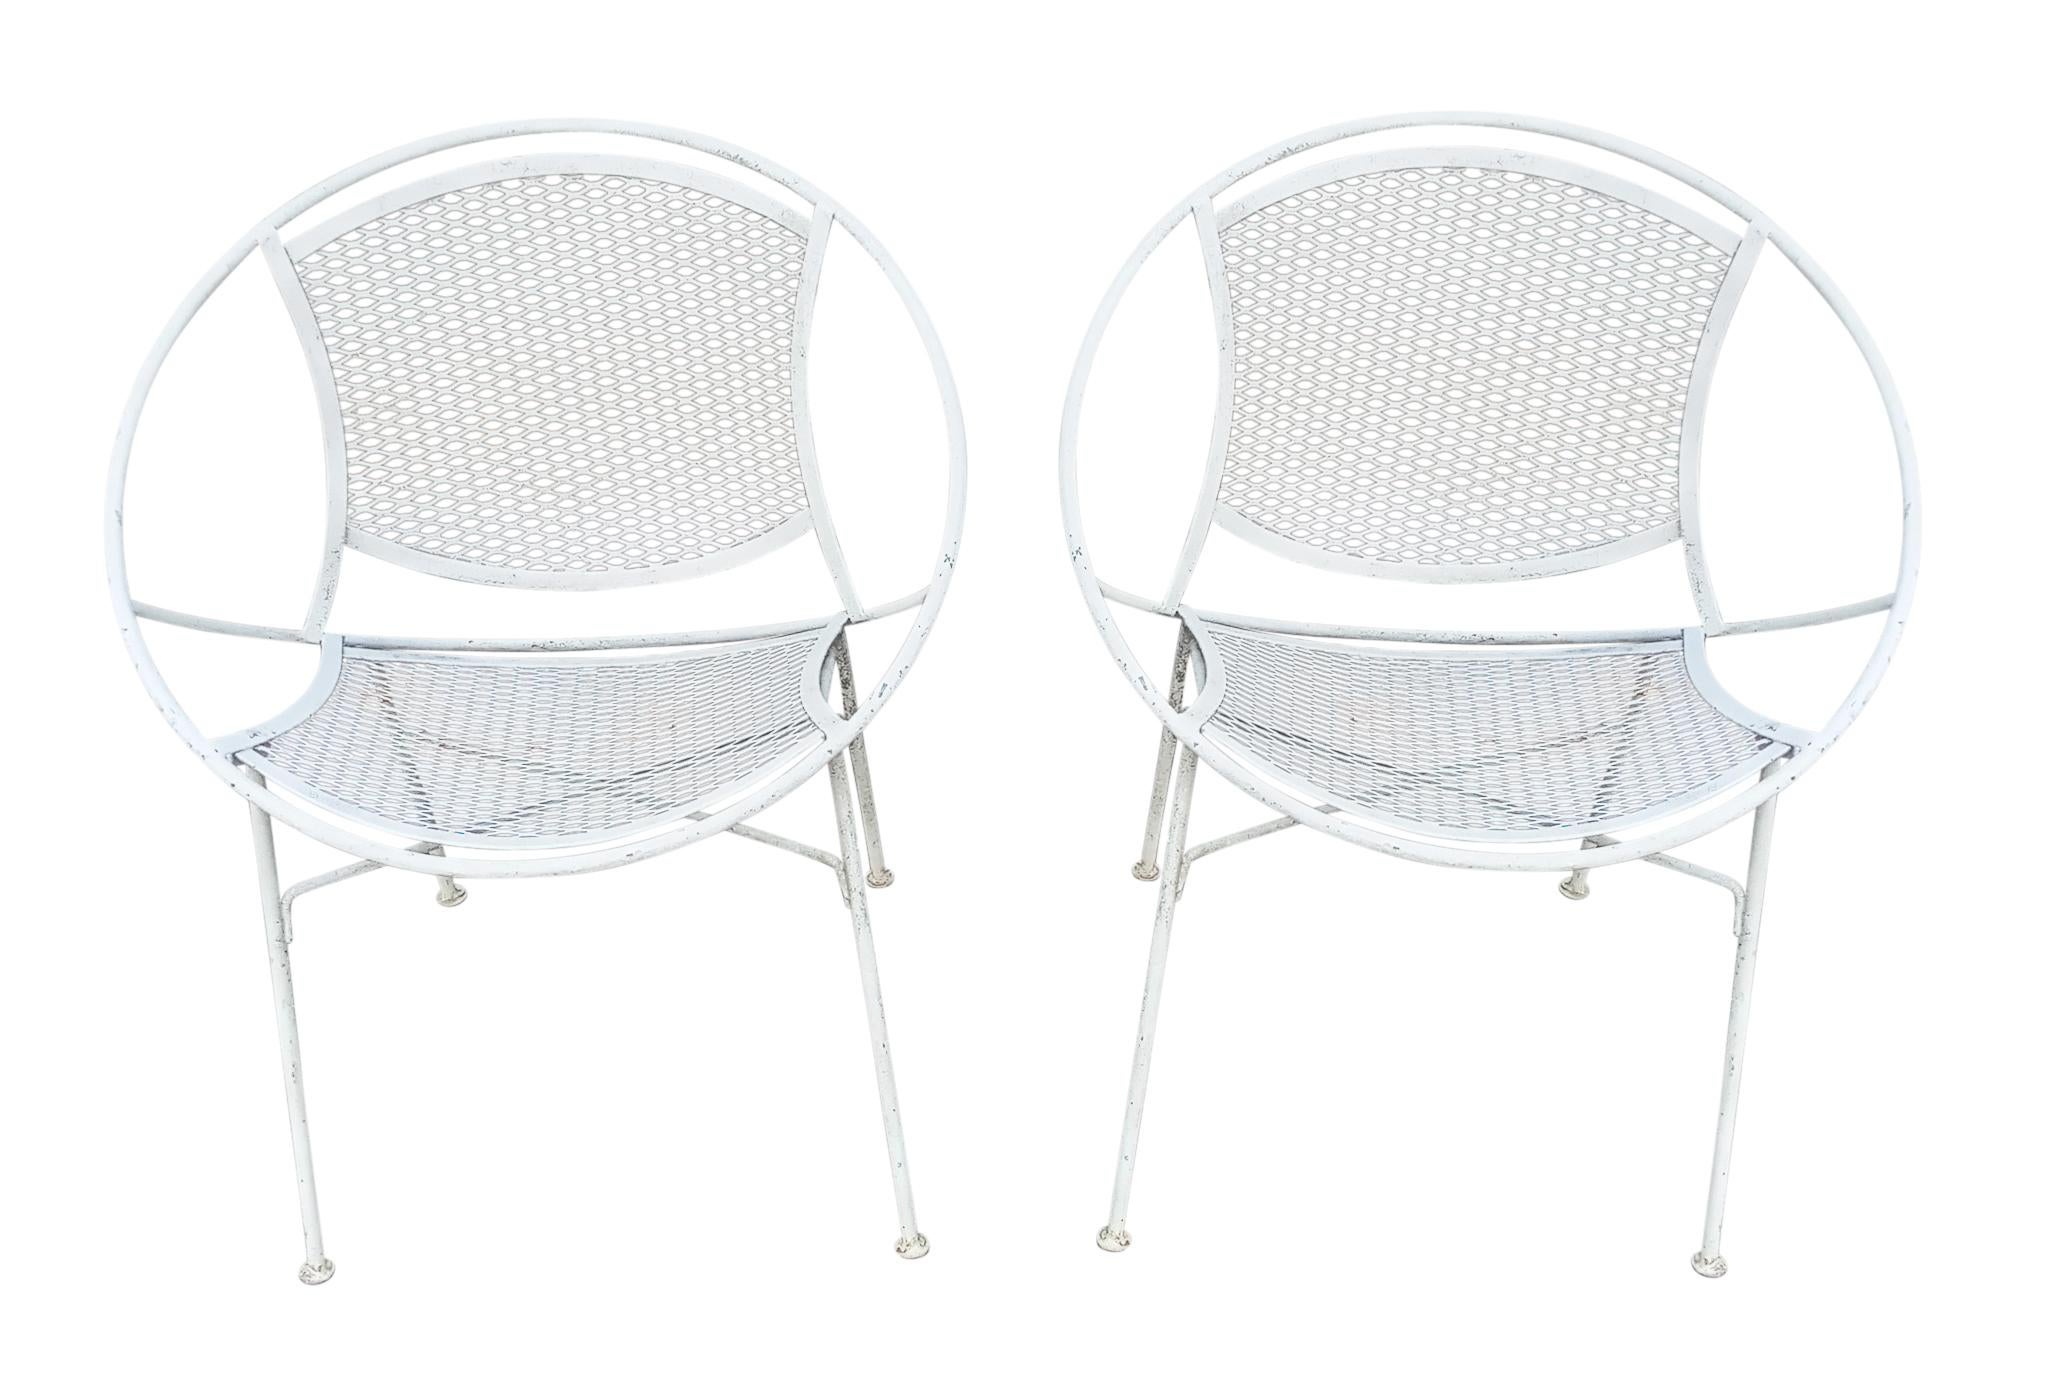 Pair of Salterini Radar chairs in white enameled wrought iron.  
A fine pair of the iconic model designed by Maurizio Tempestini, for Salterini.
Each chair measures 30-inches high x 25-inches wide x 21-inches deep with a seat height of